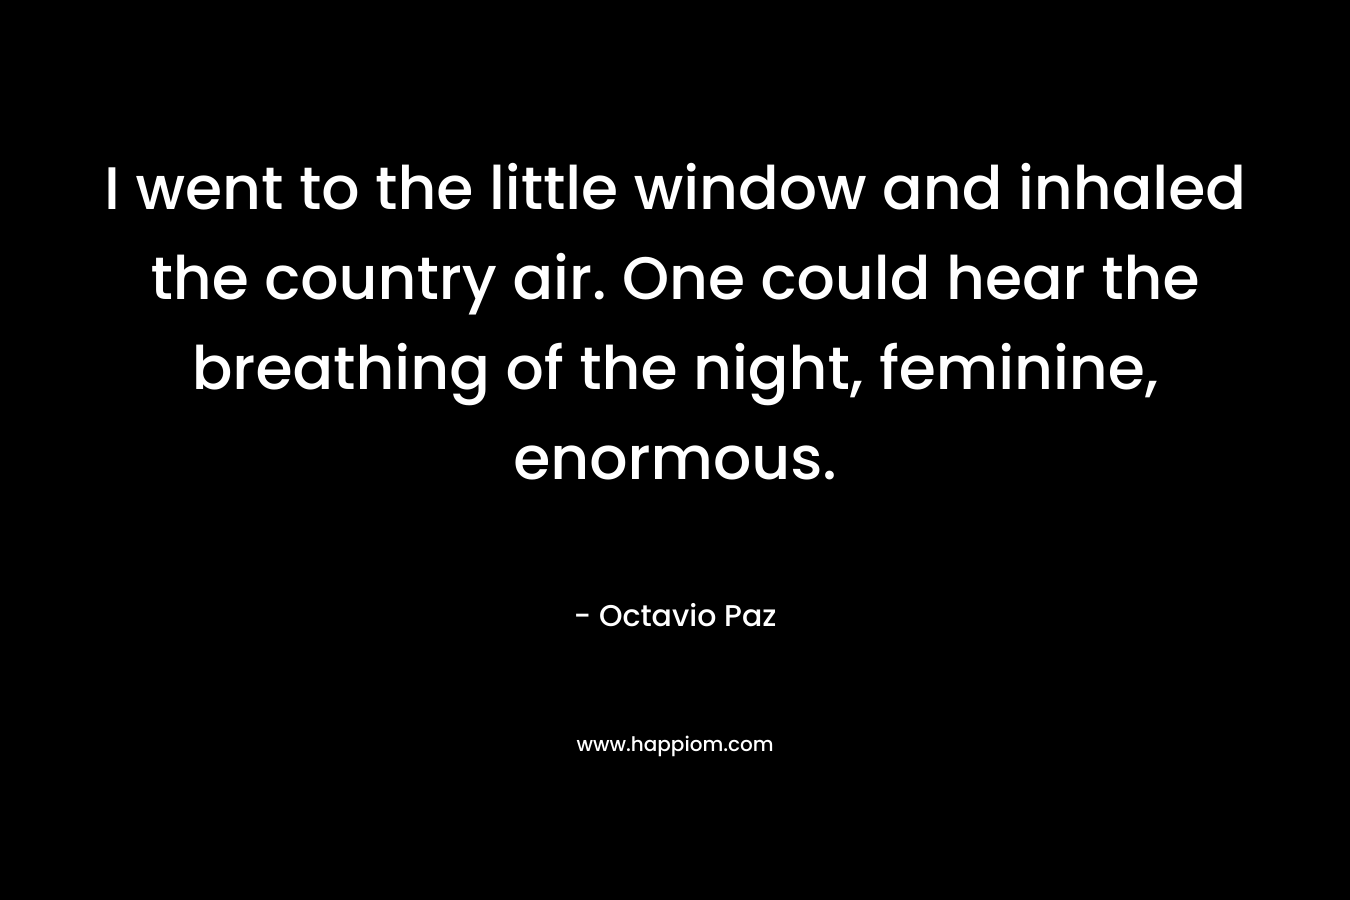 I went to the little window and inhaled the country air. One could hear the breathing of the night, feminine, enormous. – Octavio Paz